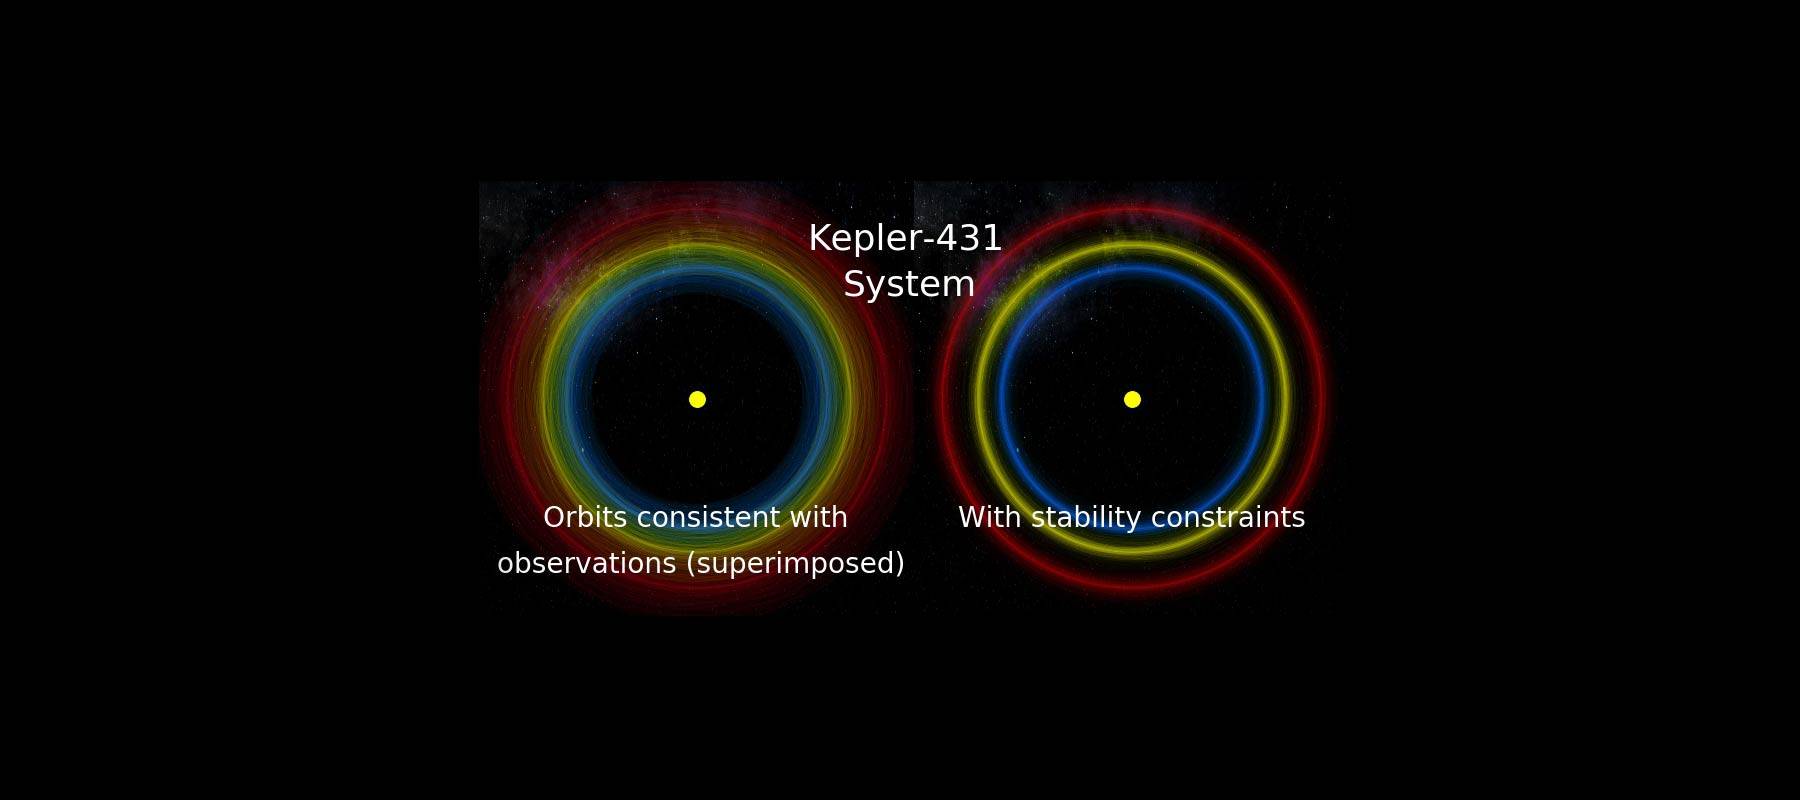 image contrasting orbits consistent with observations (superimposed) and With stability constraints in the Kepler-431 System